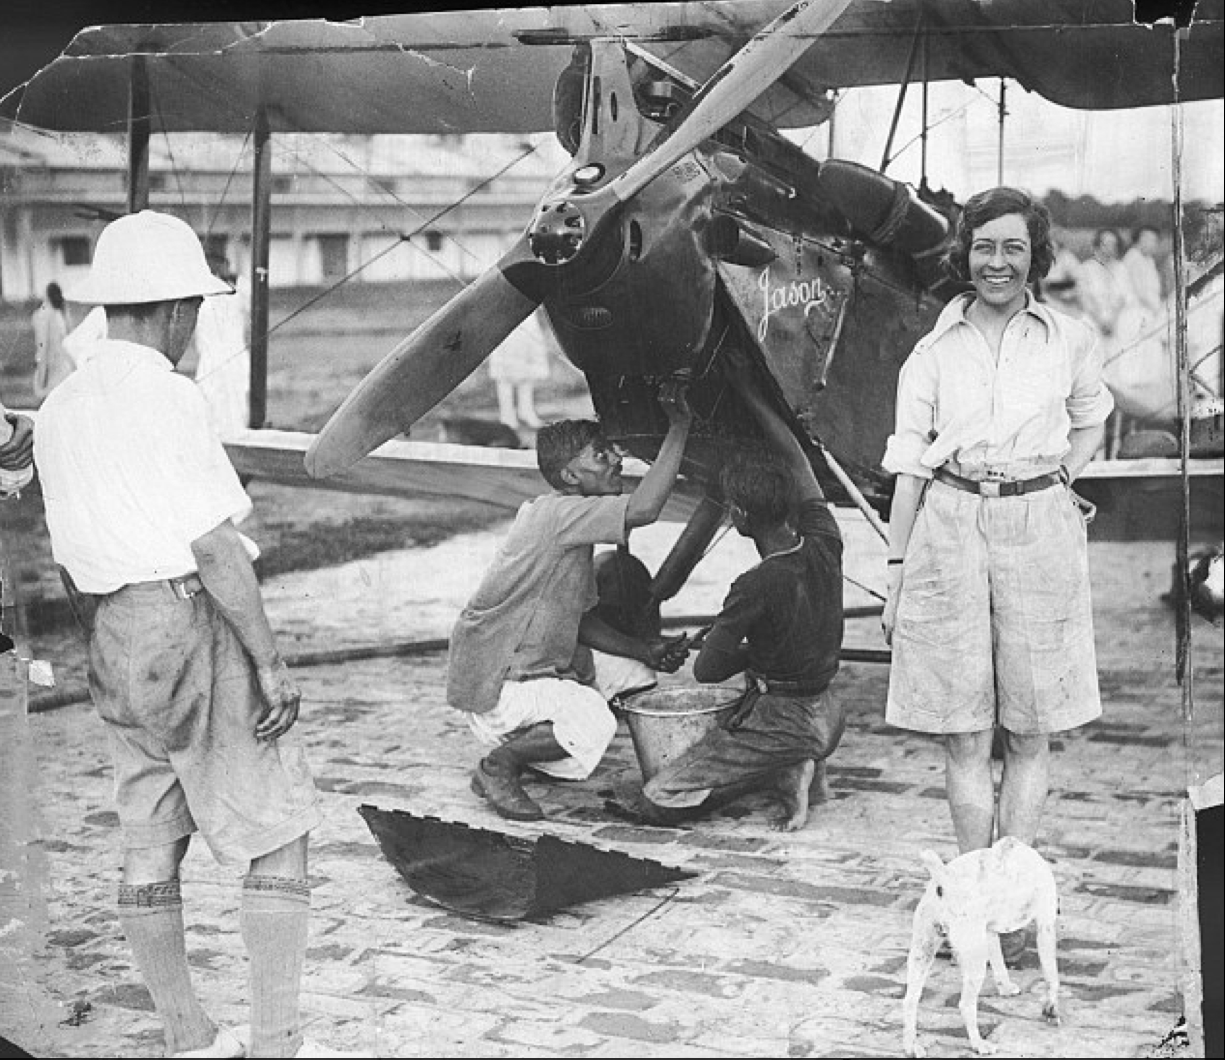 Amy Johnson with her DH.60 Gipsy Moth at Calcutta, May 1930. (DailMail.com)